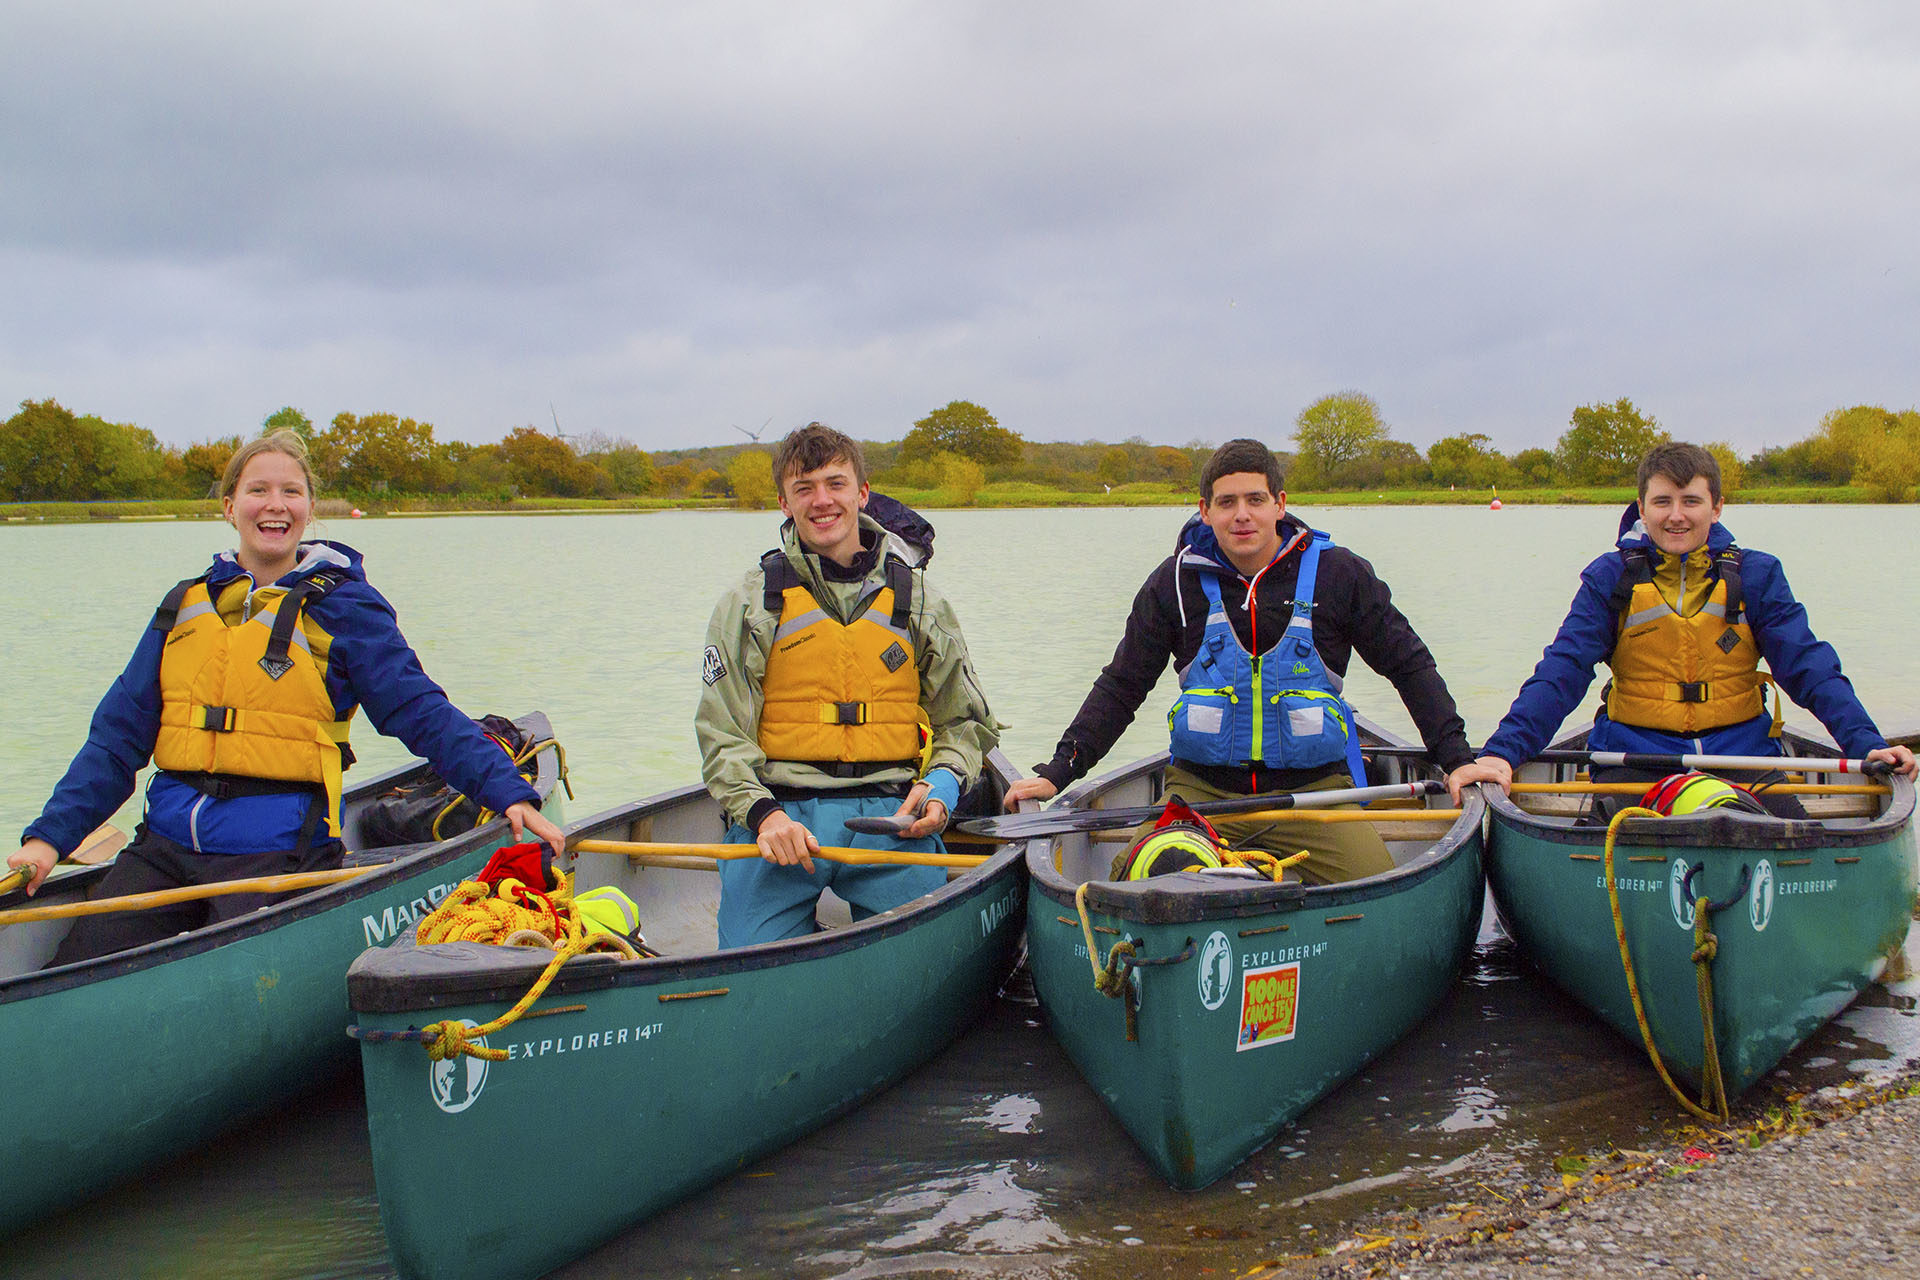 Outdoor Pursuits. Students in canoes, smiling